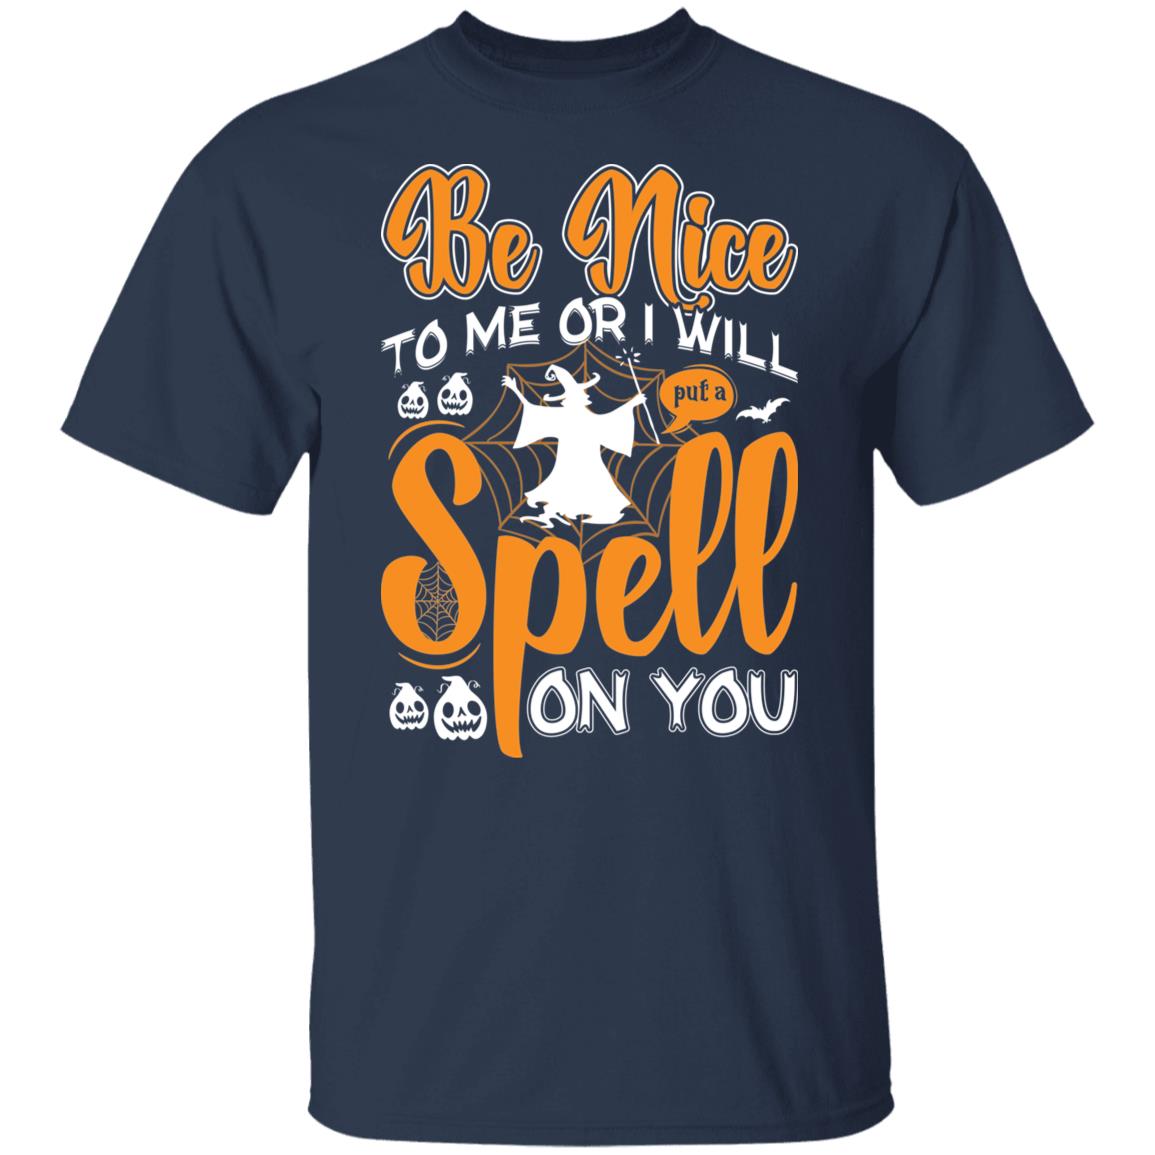 Halloween Shirt Be Nice To Me Or I Will Put a Spell on You